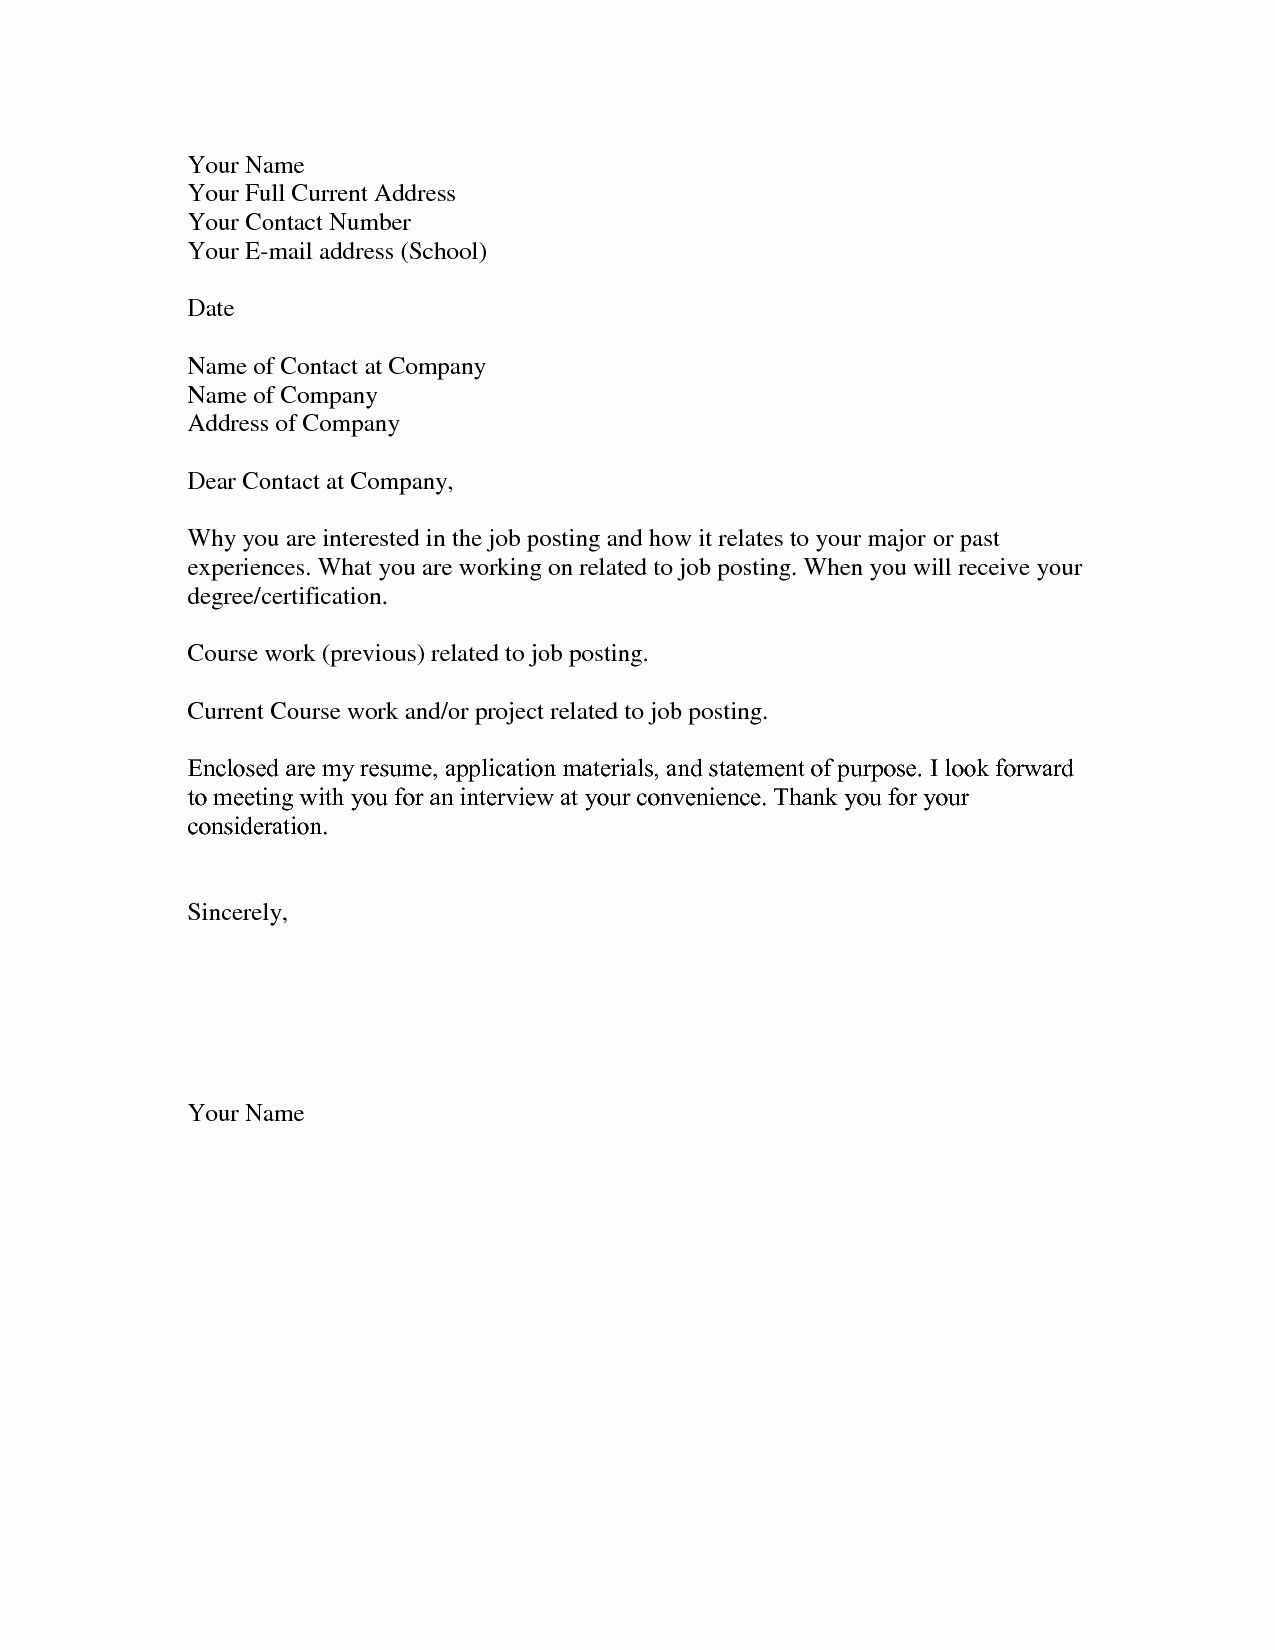 Simple Resume Cover Letter Template Beautiful Basic Cover Letter for A Resume